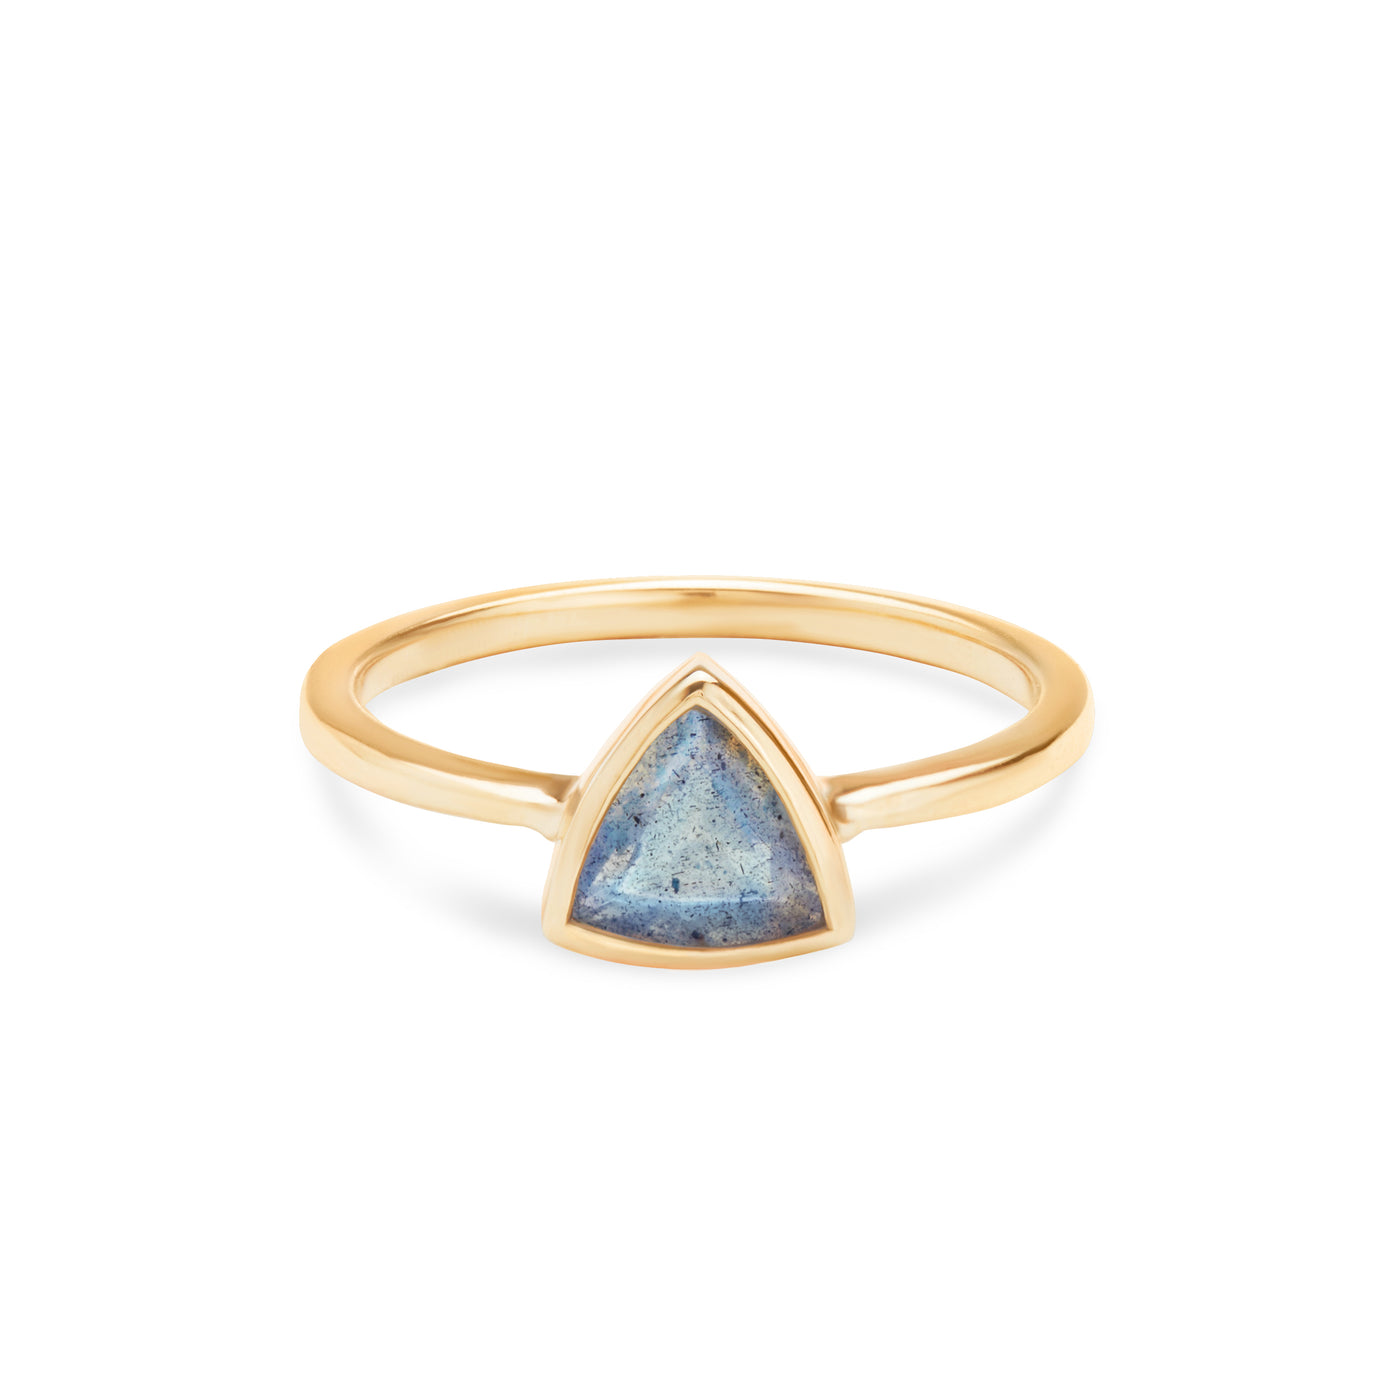 14k Yellow Gold Ring with Blue Labradorite in Triangle Shape laying Flat on White Background